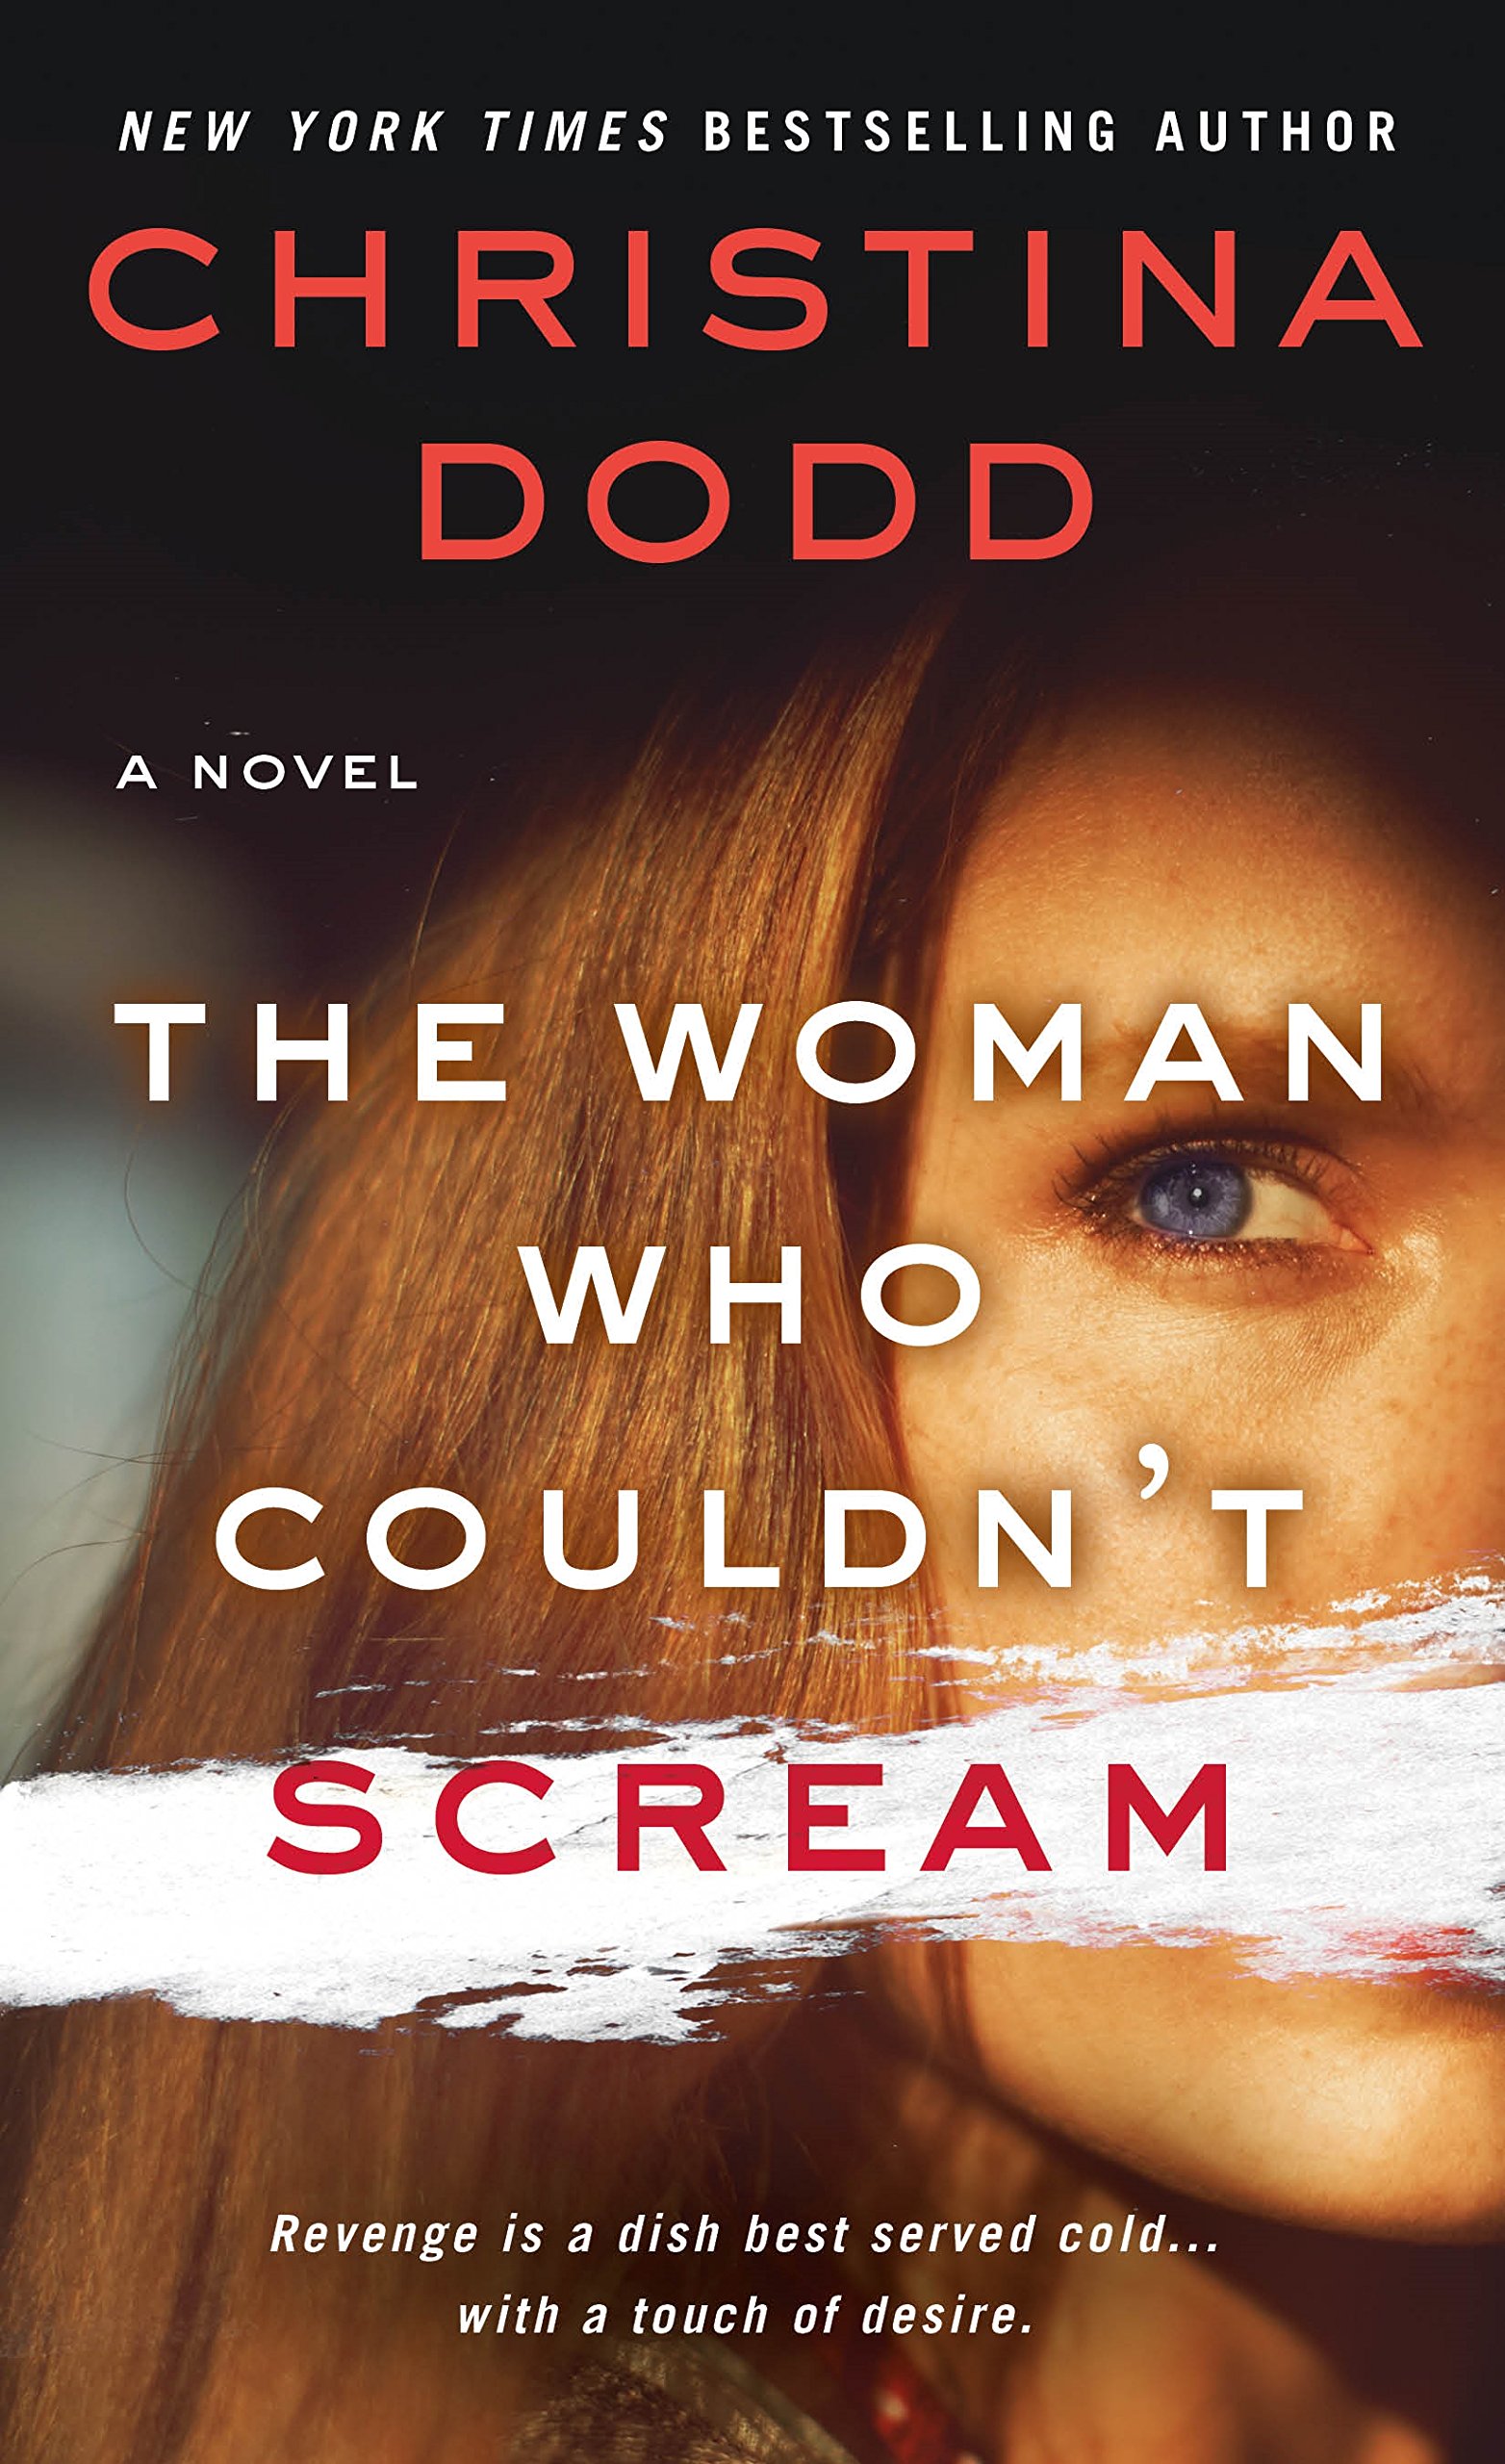 The Woman Who Couldn't Scream: A Novel